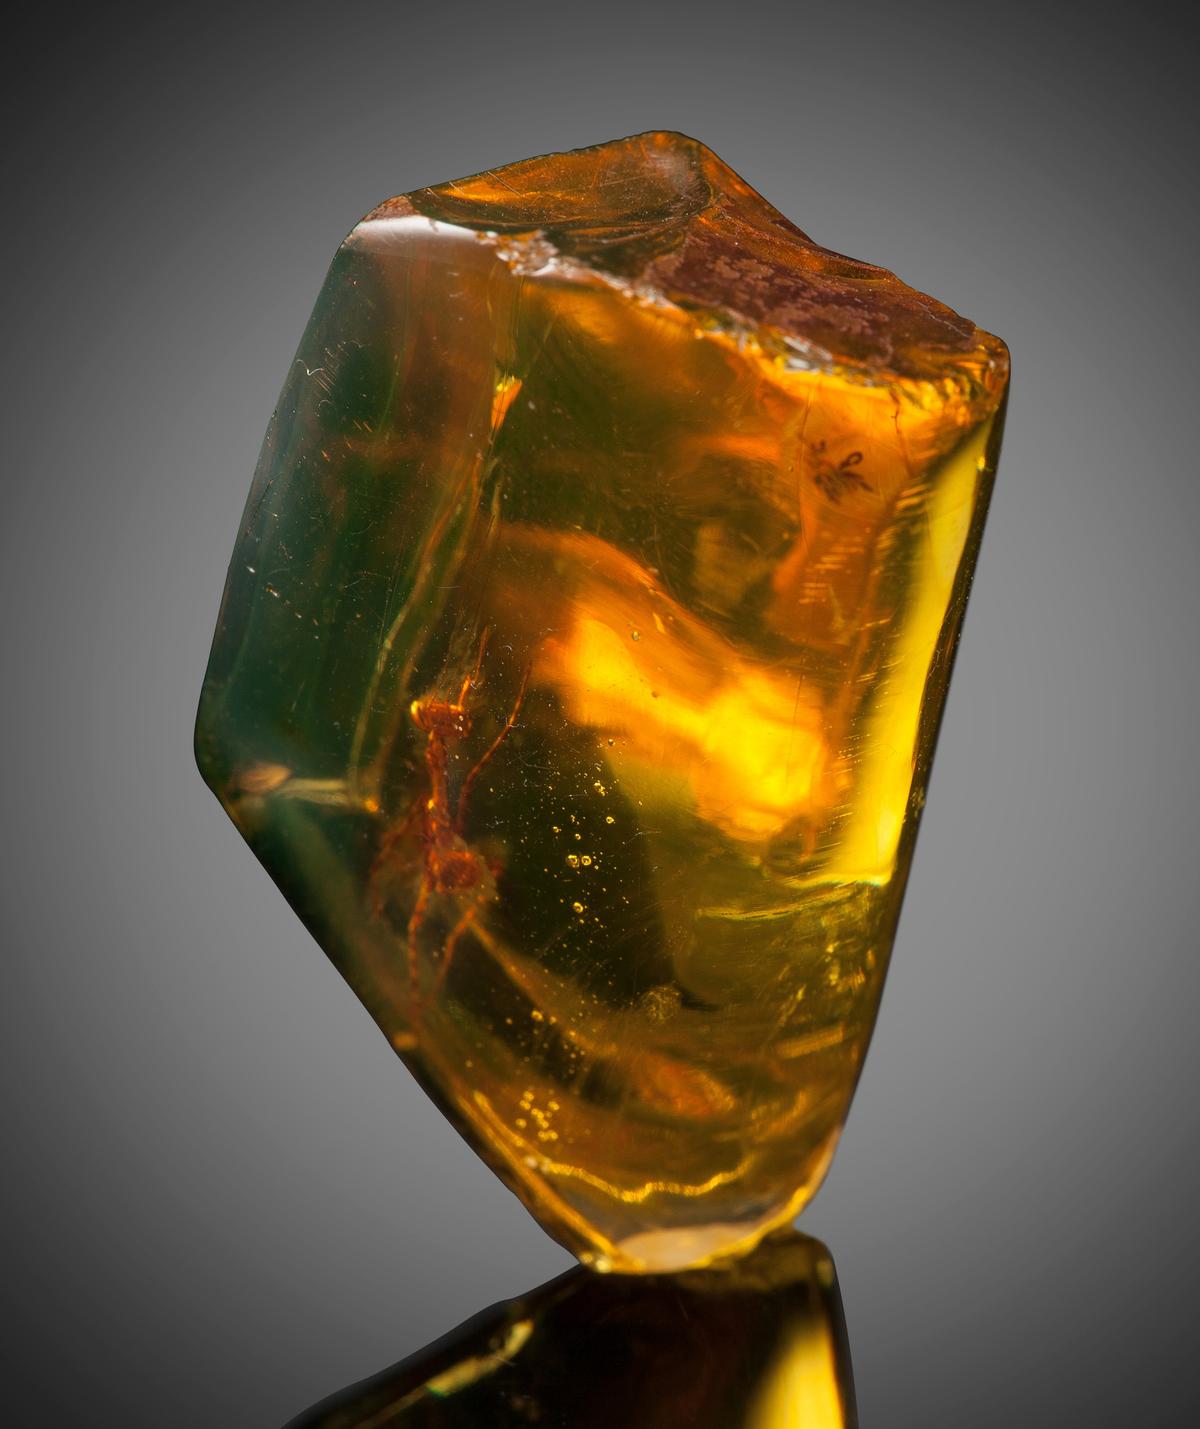 The praying mantis fossilized in amber attracted bids nearly double the original amount of $6,000 that it previously sold for in 2016. (Courtesy of Heritage Auctions, HA.com)